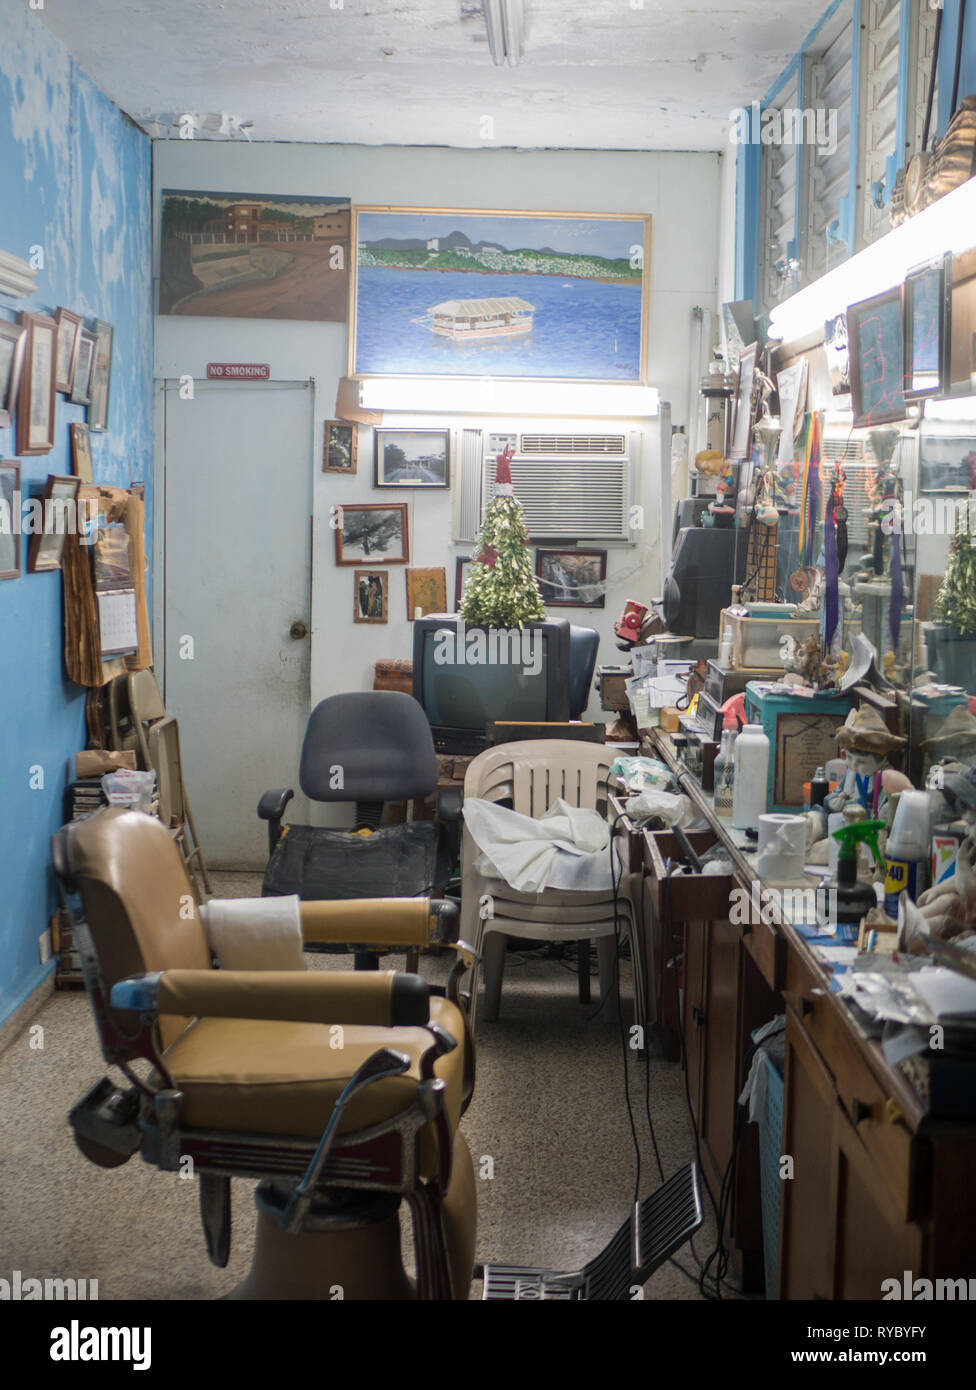 Puerto Rico. January 2019. Retro style haircut chair hairdresser in a vintage barber shop interior Stock Photo